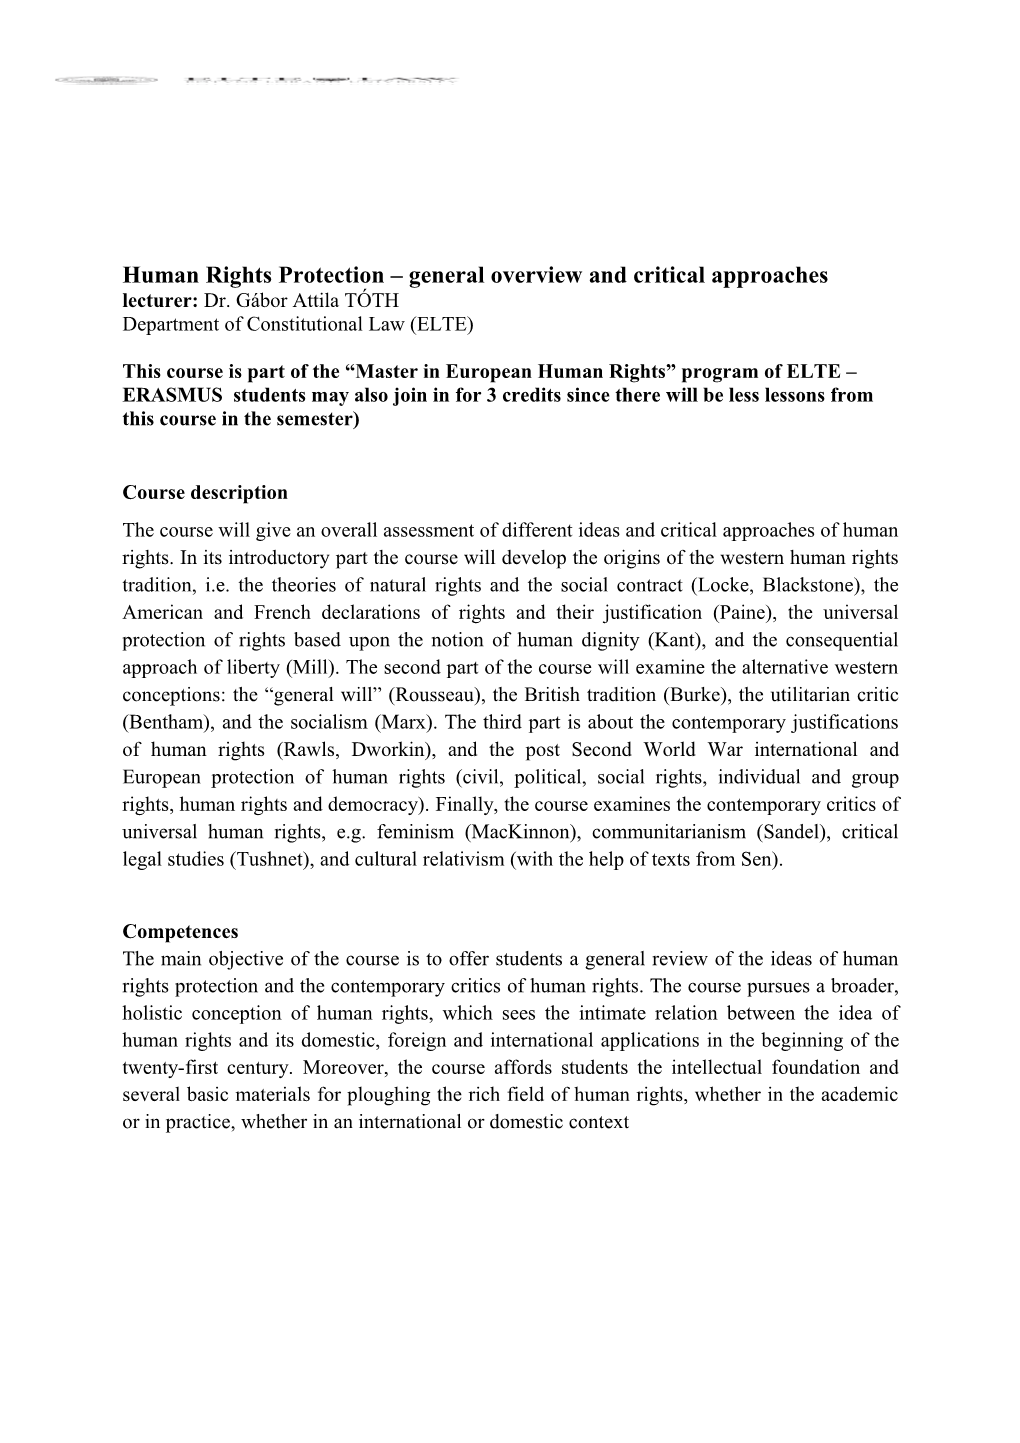 Human Rights Protection General Overview and Critical Approaches